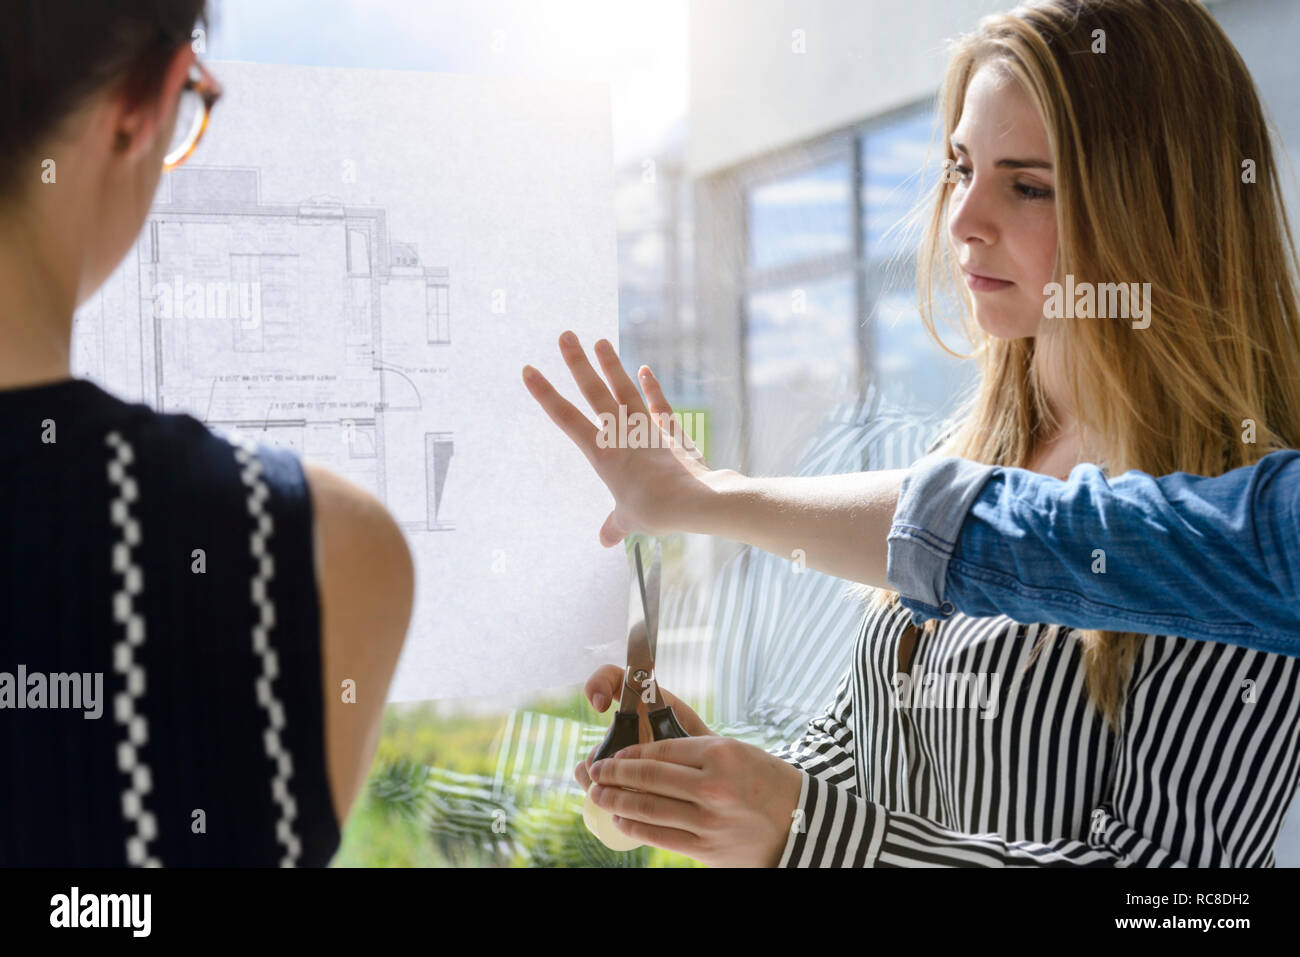 Colleagues discussing plans on glass wall Stock Photo